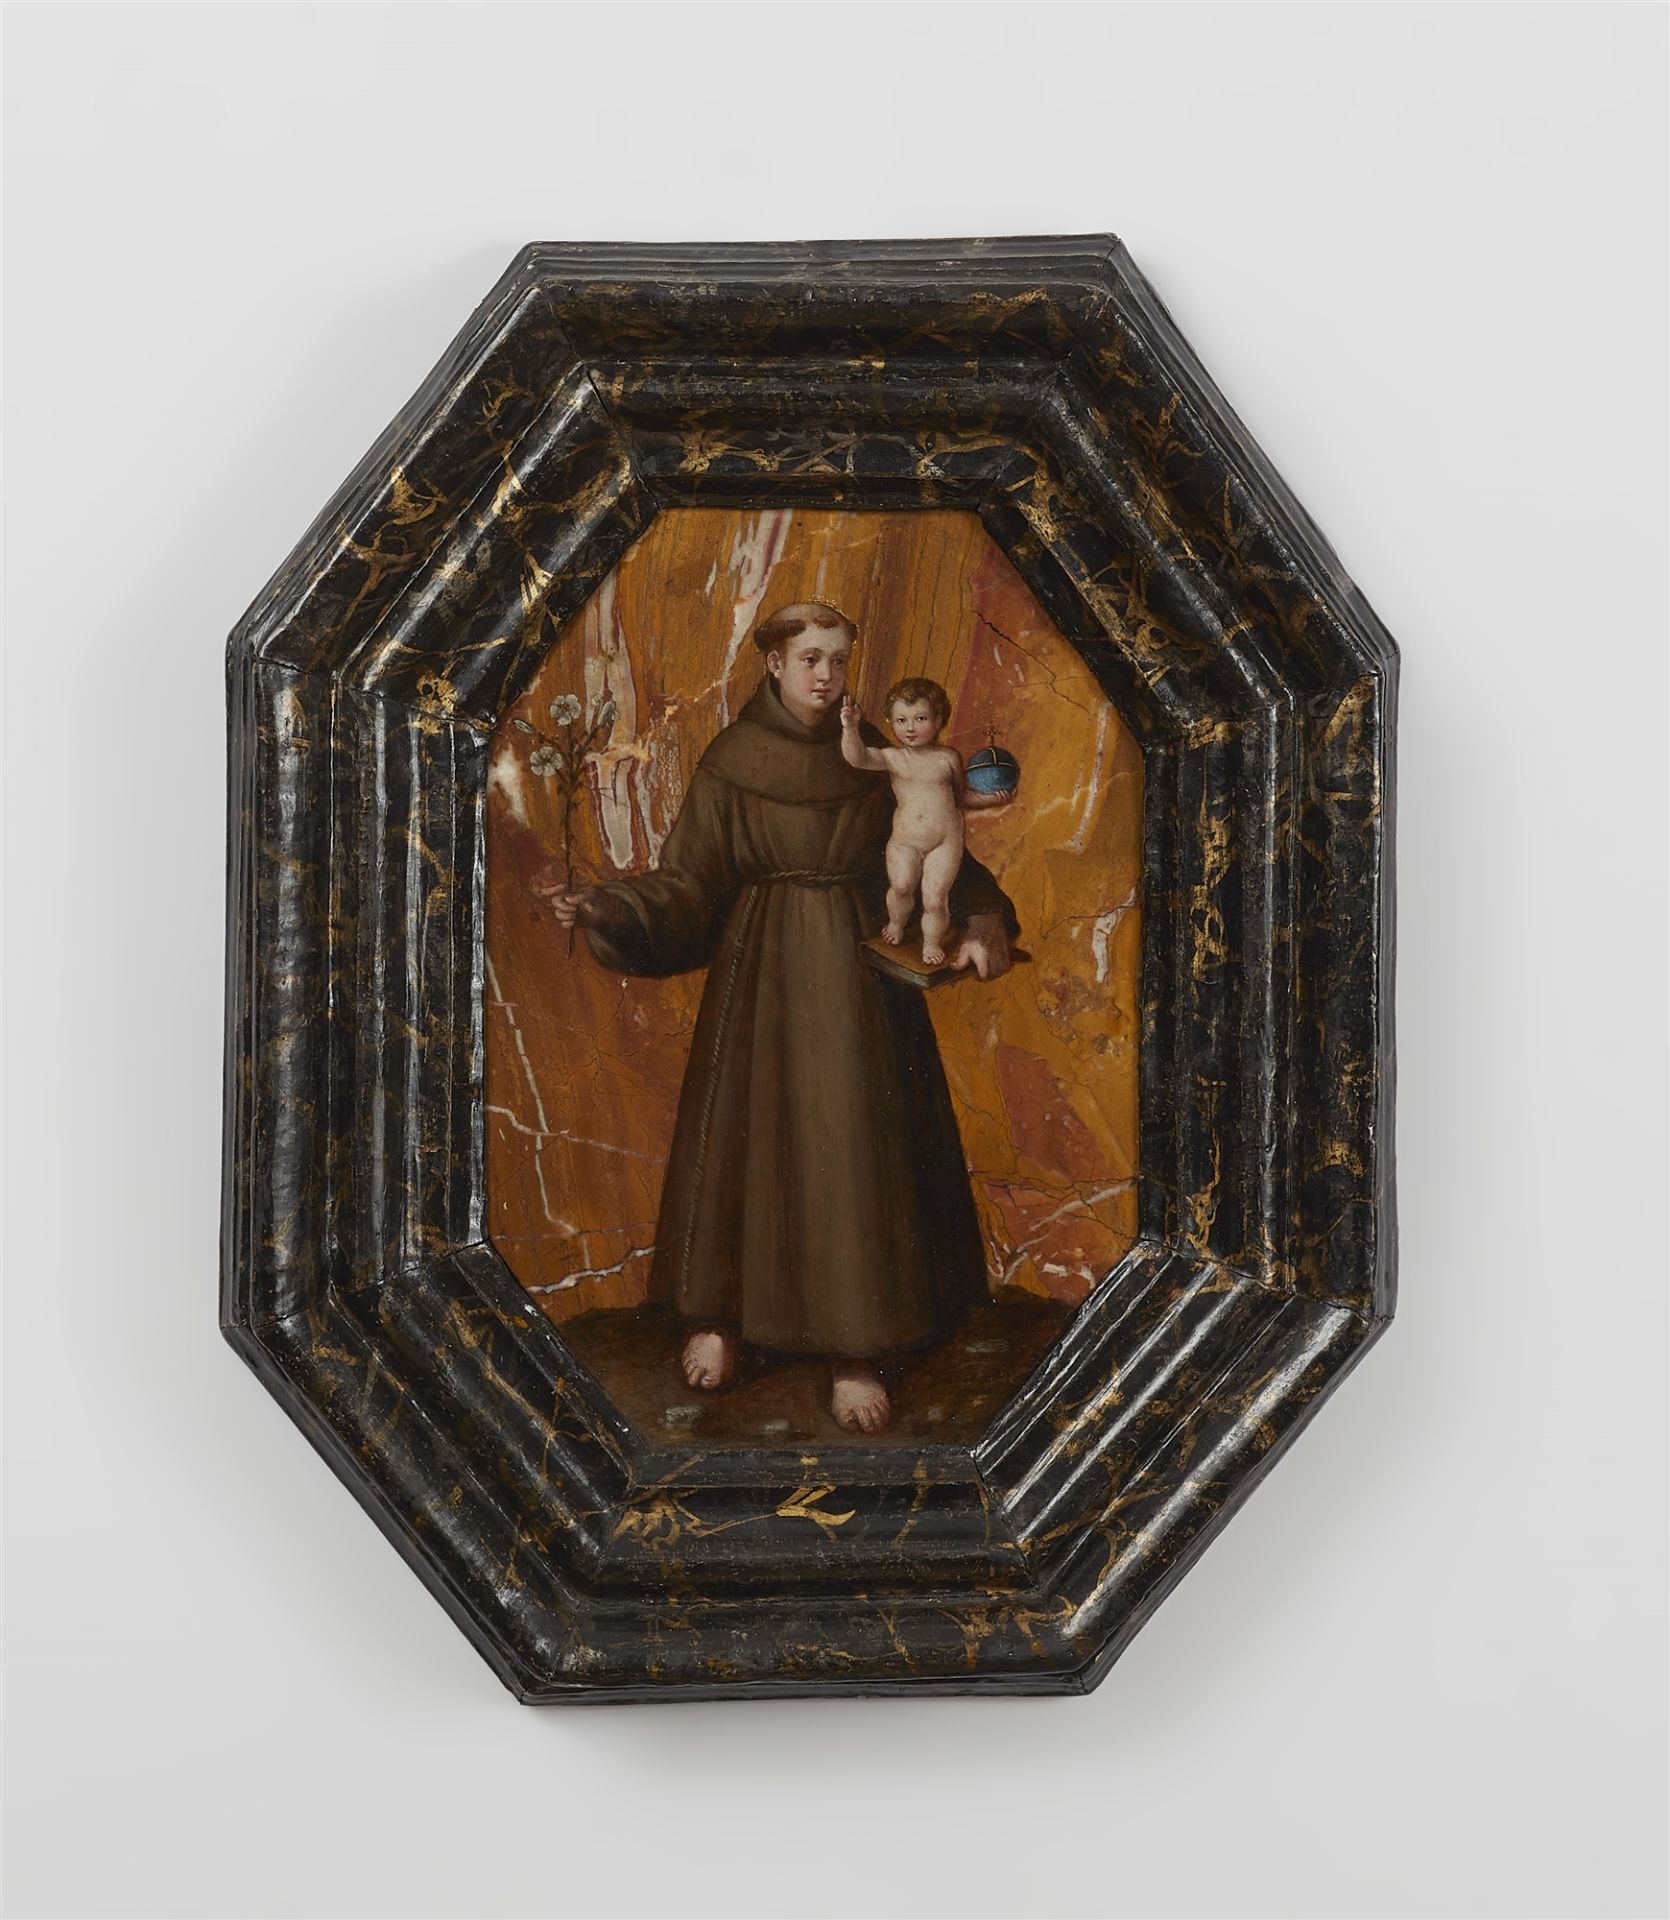 An octagonal stone panel with St. Anthony